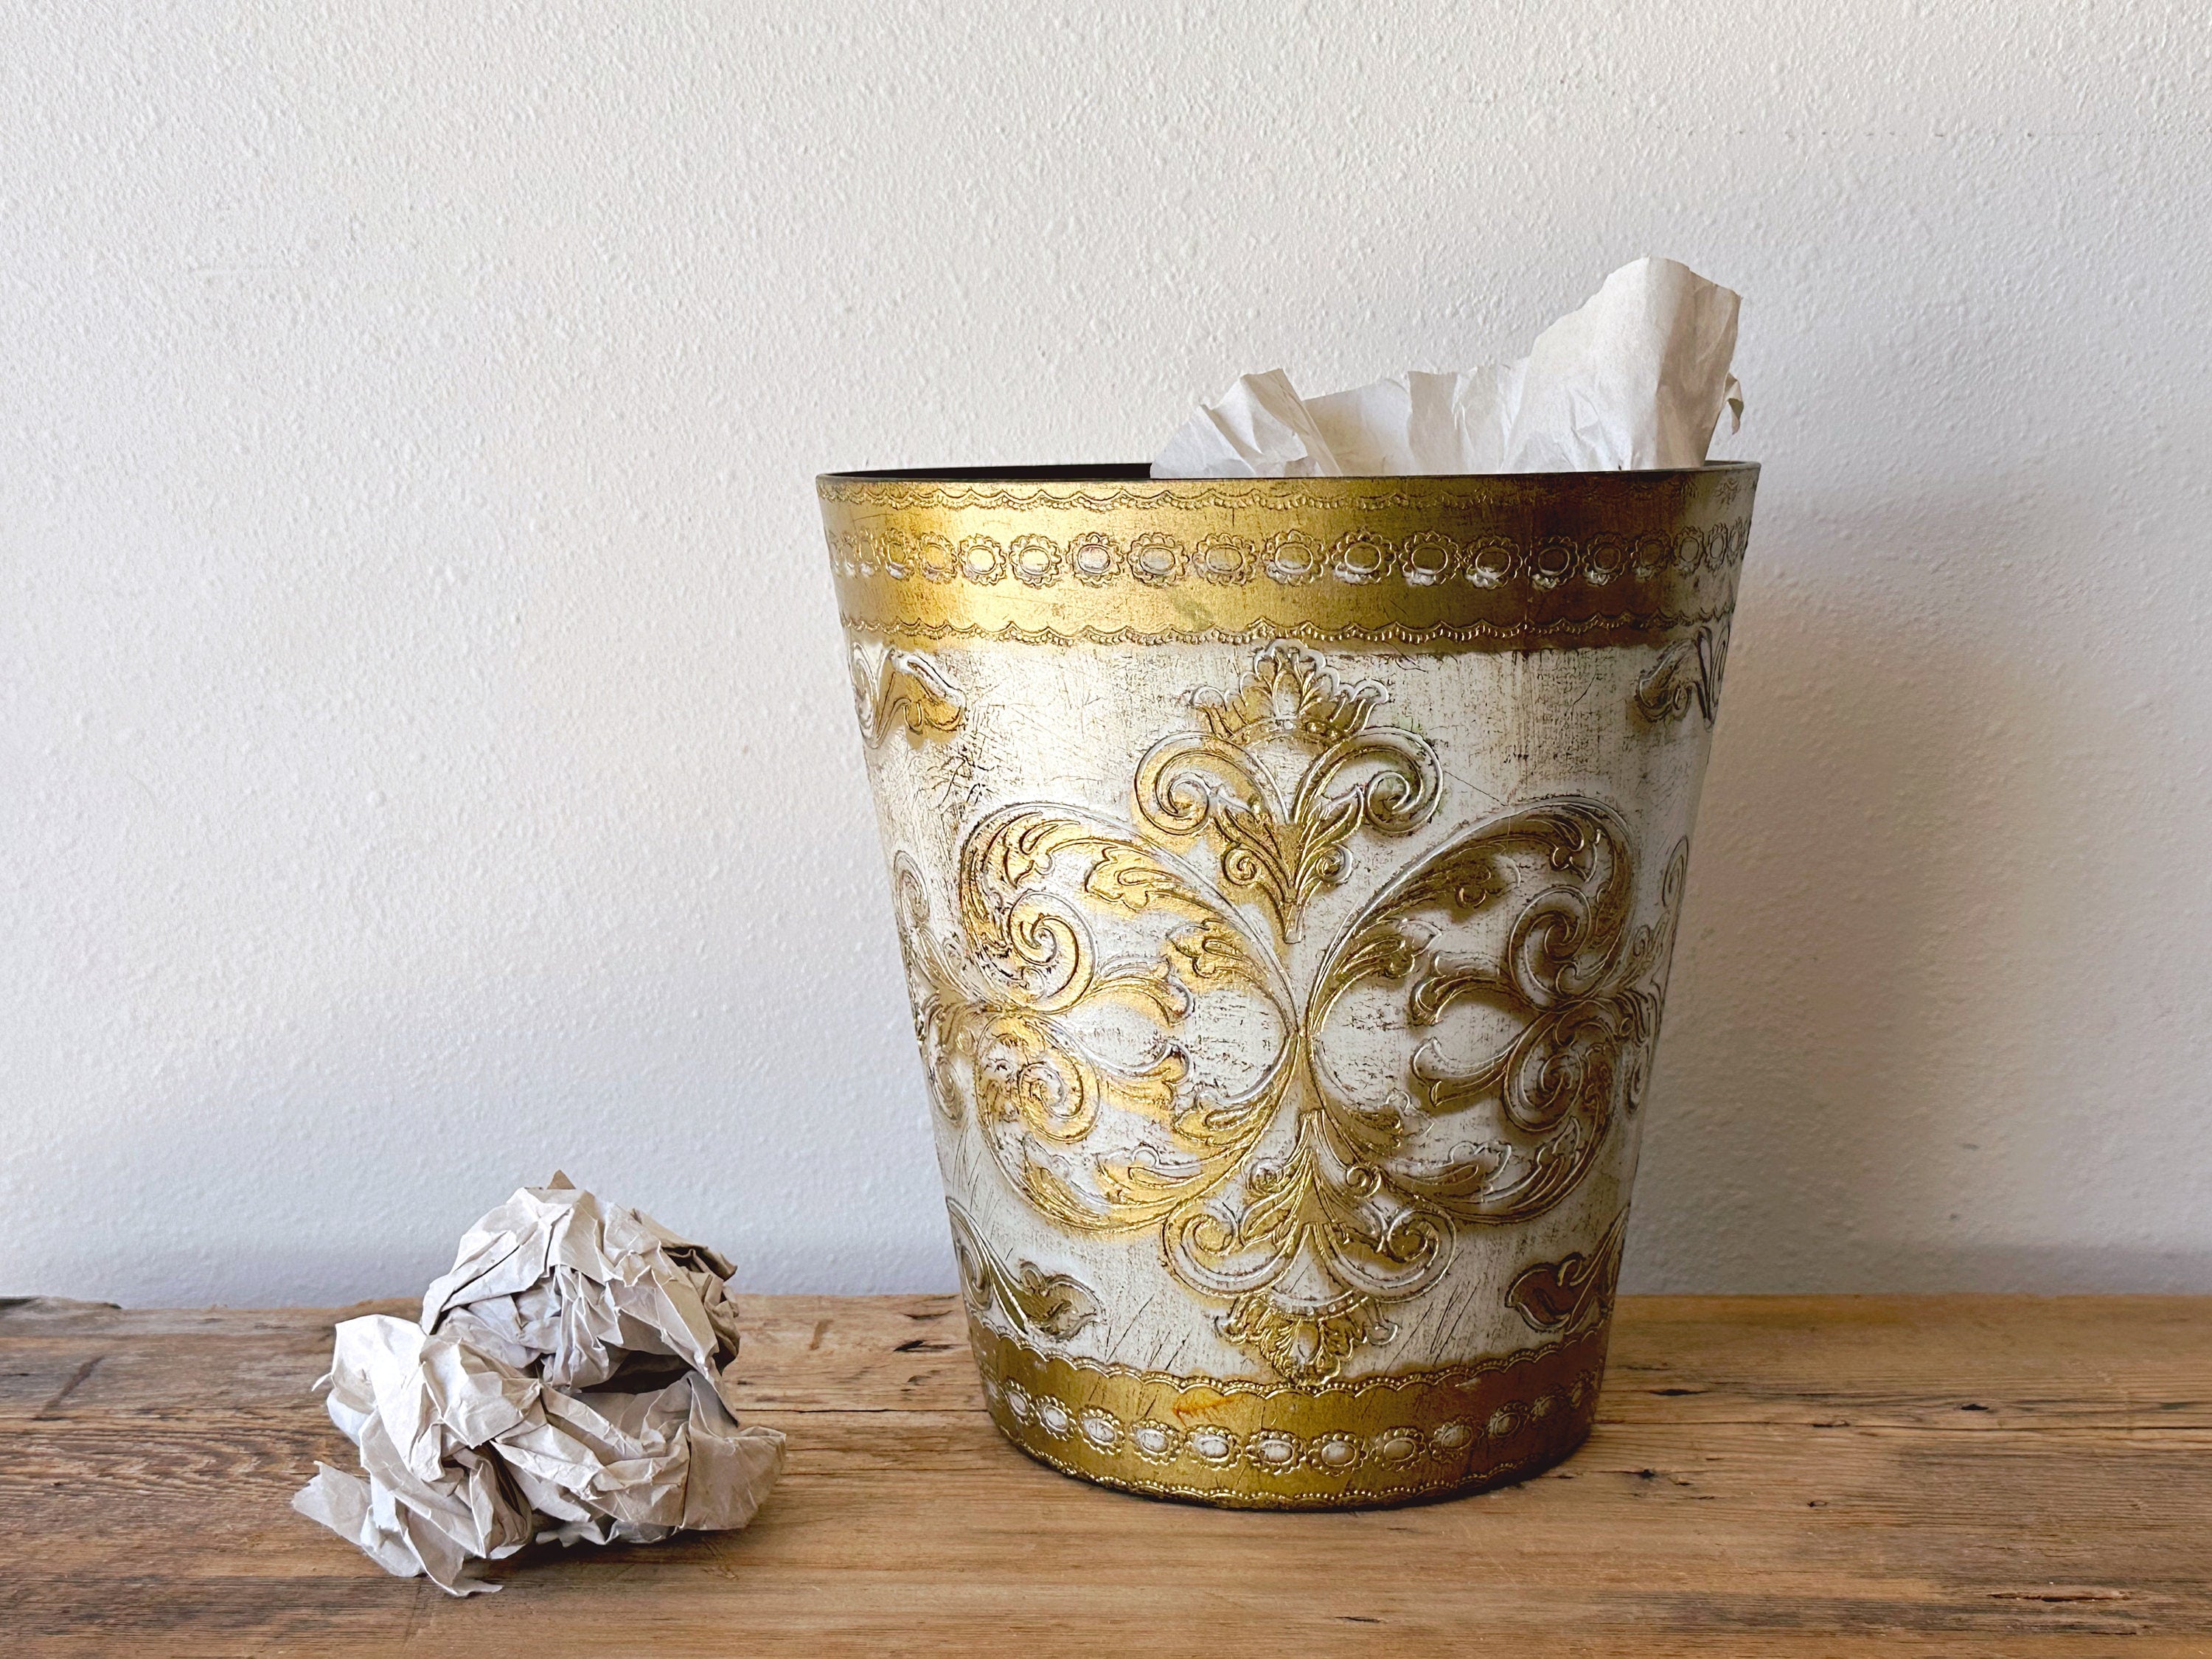 Mid Century Italian Florentine Hand Painted Gilt Waste Basket | Vintage Distressed Wooden Trash Can Bin | Office Decor | Made In Italy